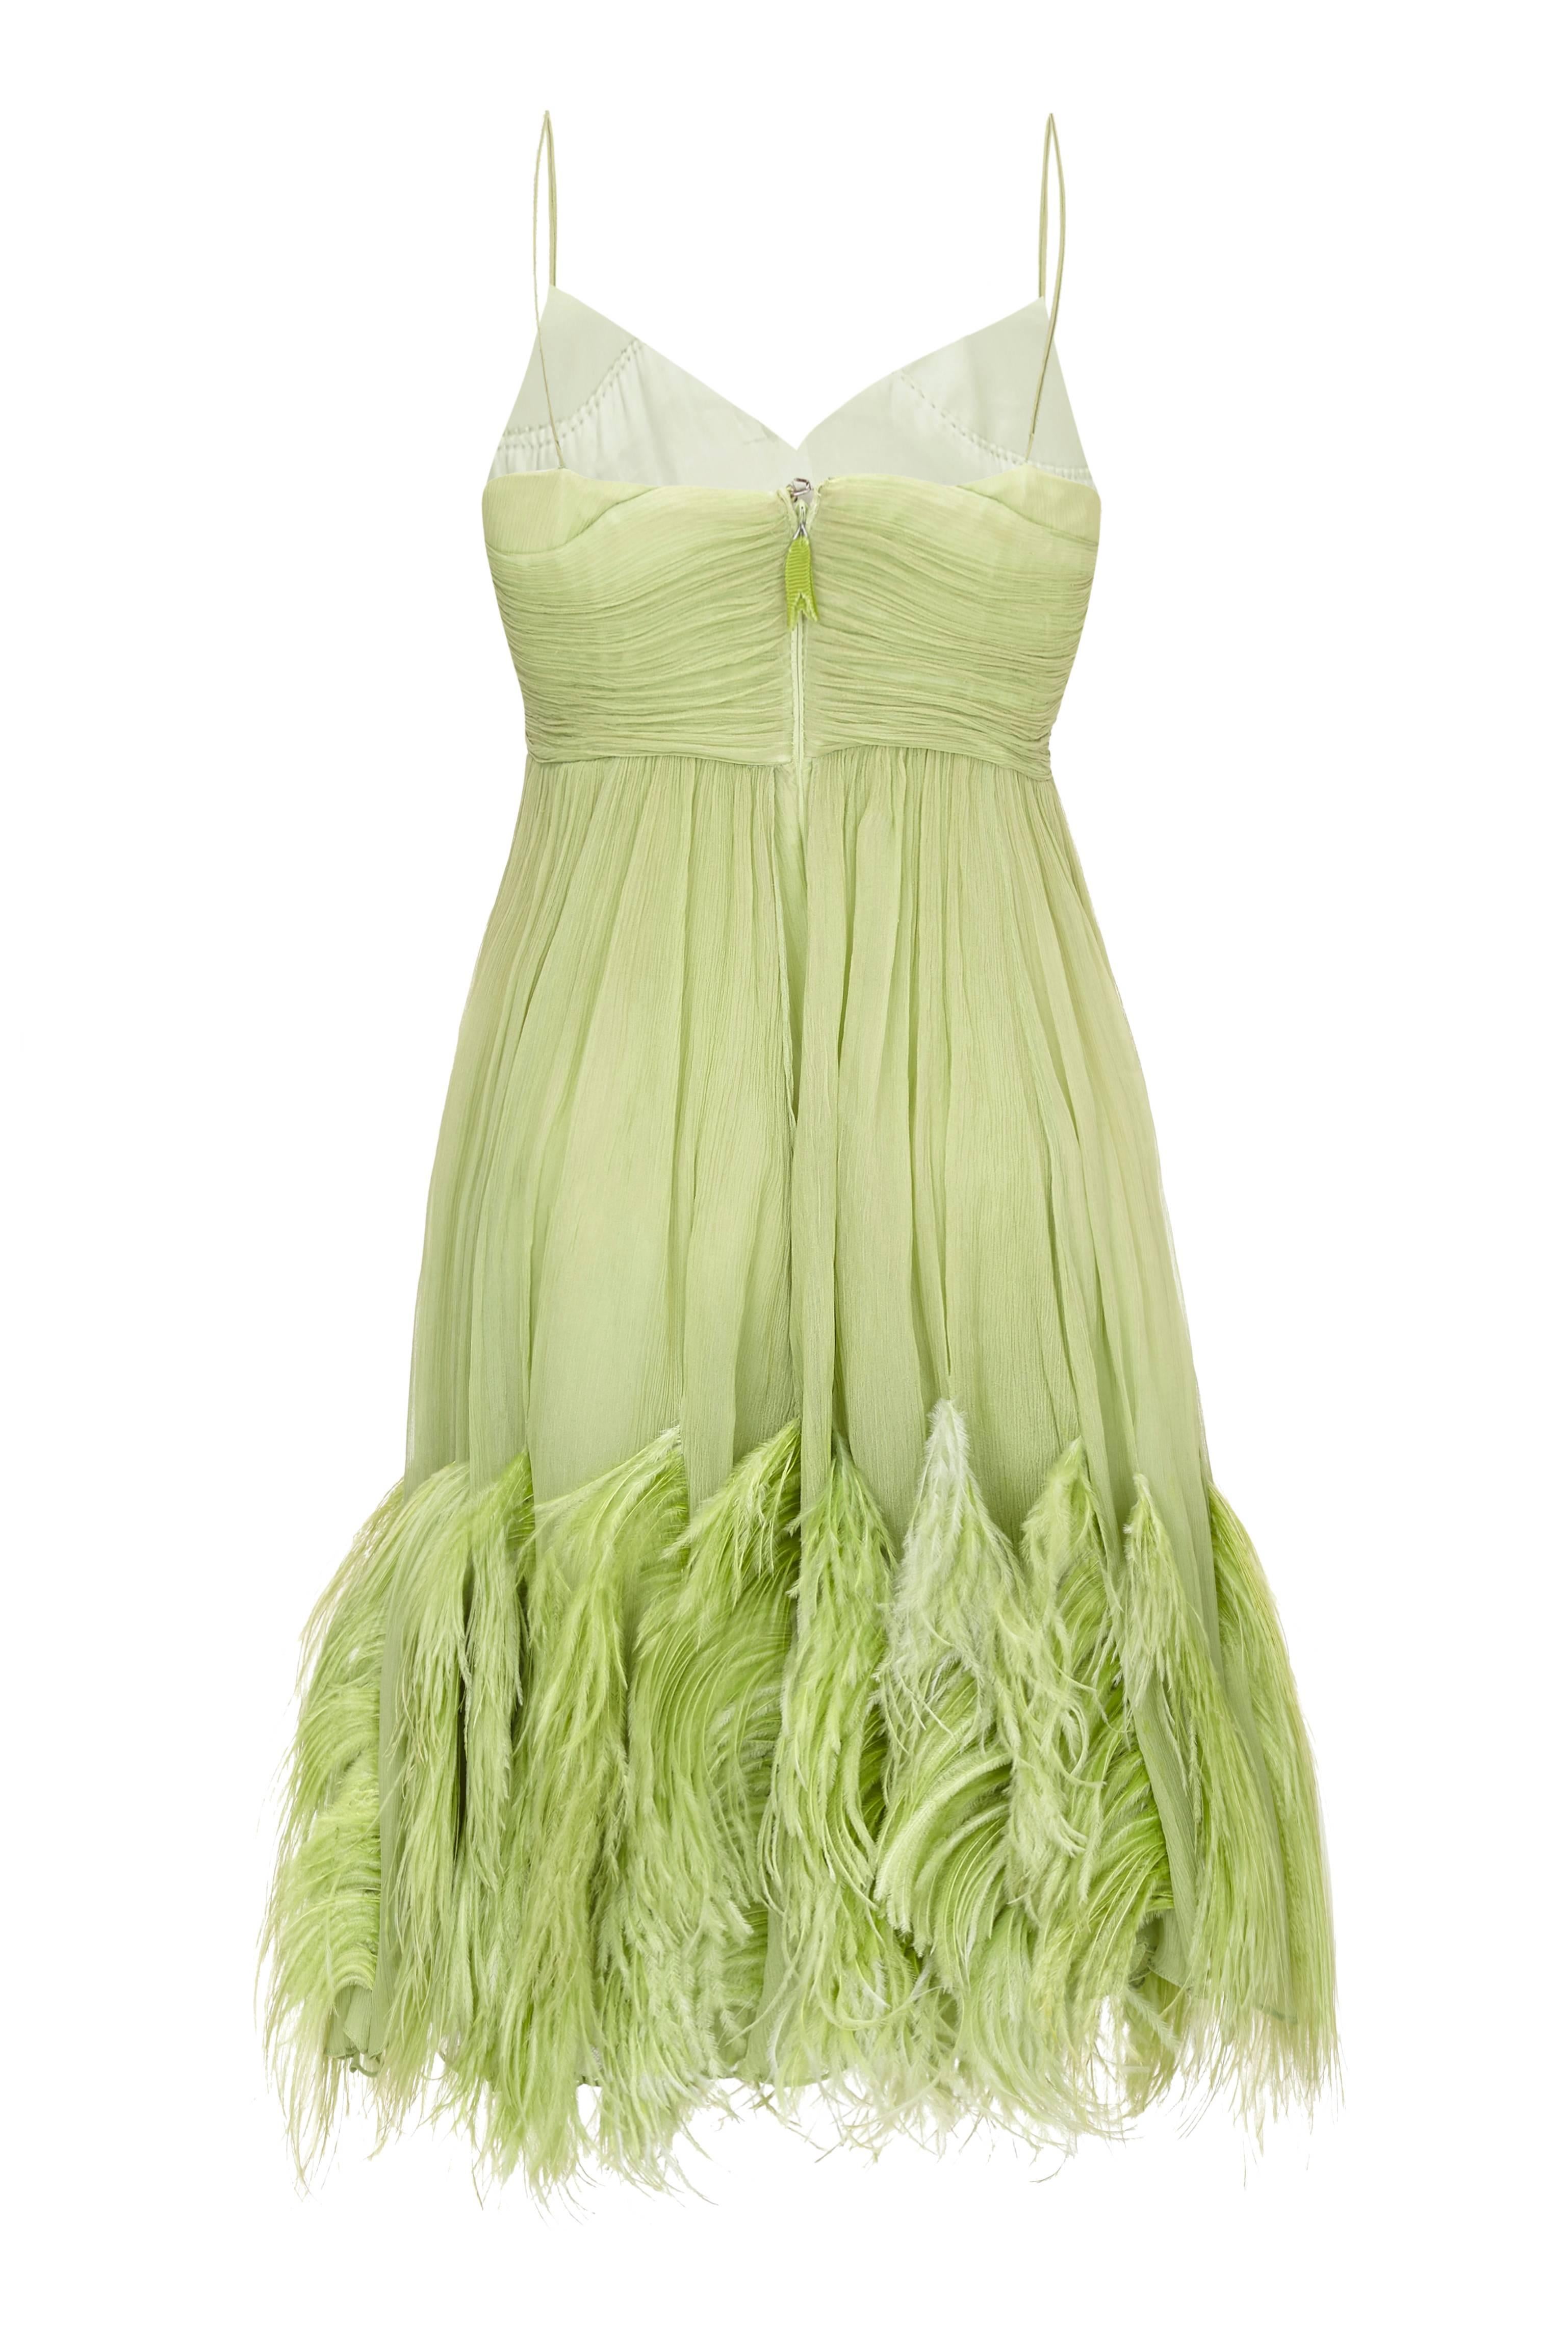 Amazing vintage 1960s mini dress in soft green silk chiffon with fabulous feather trim around the hem. This pretty cocktail dress has ruching around the bust, which finishes at an empire line and a double layered chiffon skirt. It fastens at the